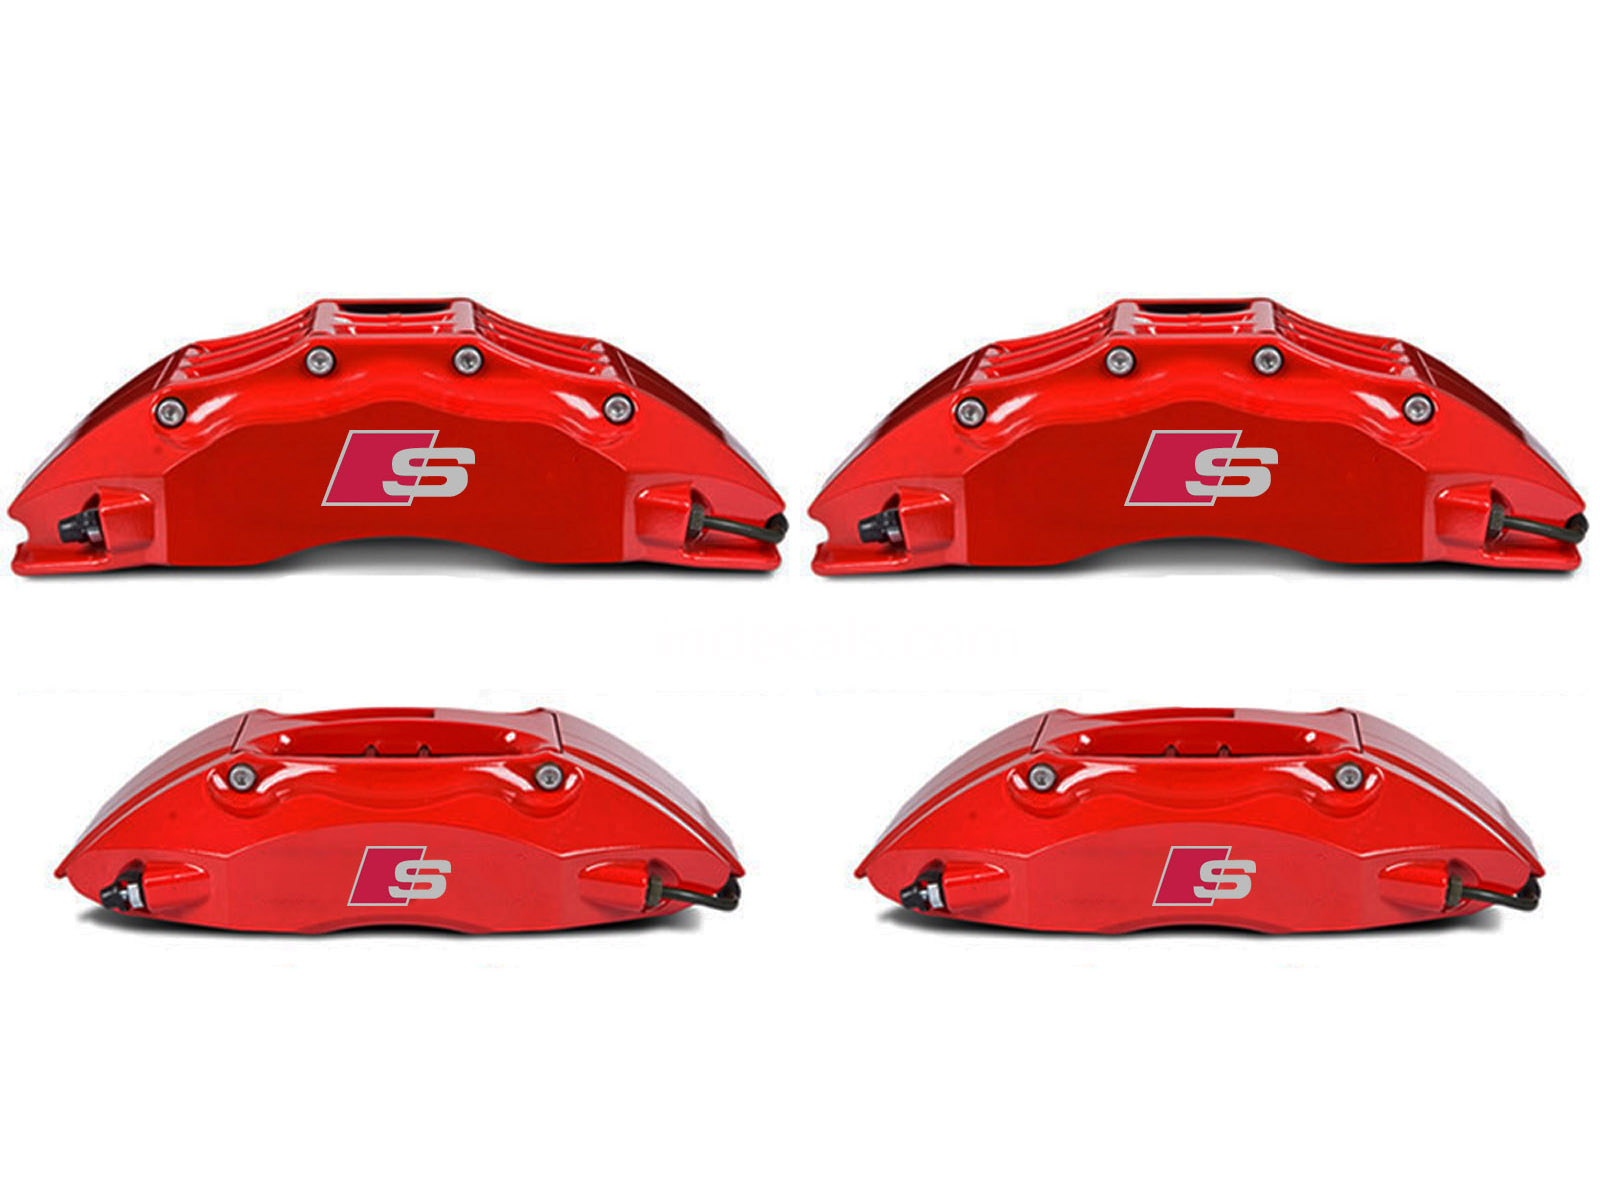 4 x Audi S-Line Stickers for Brake Calipers - Silver + Red